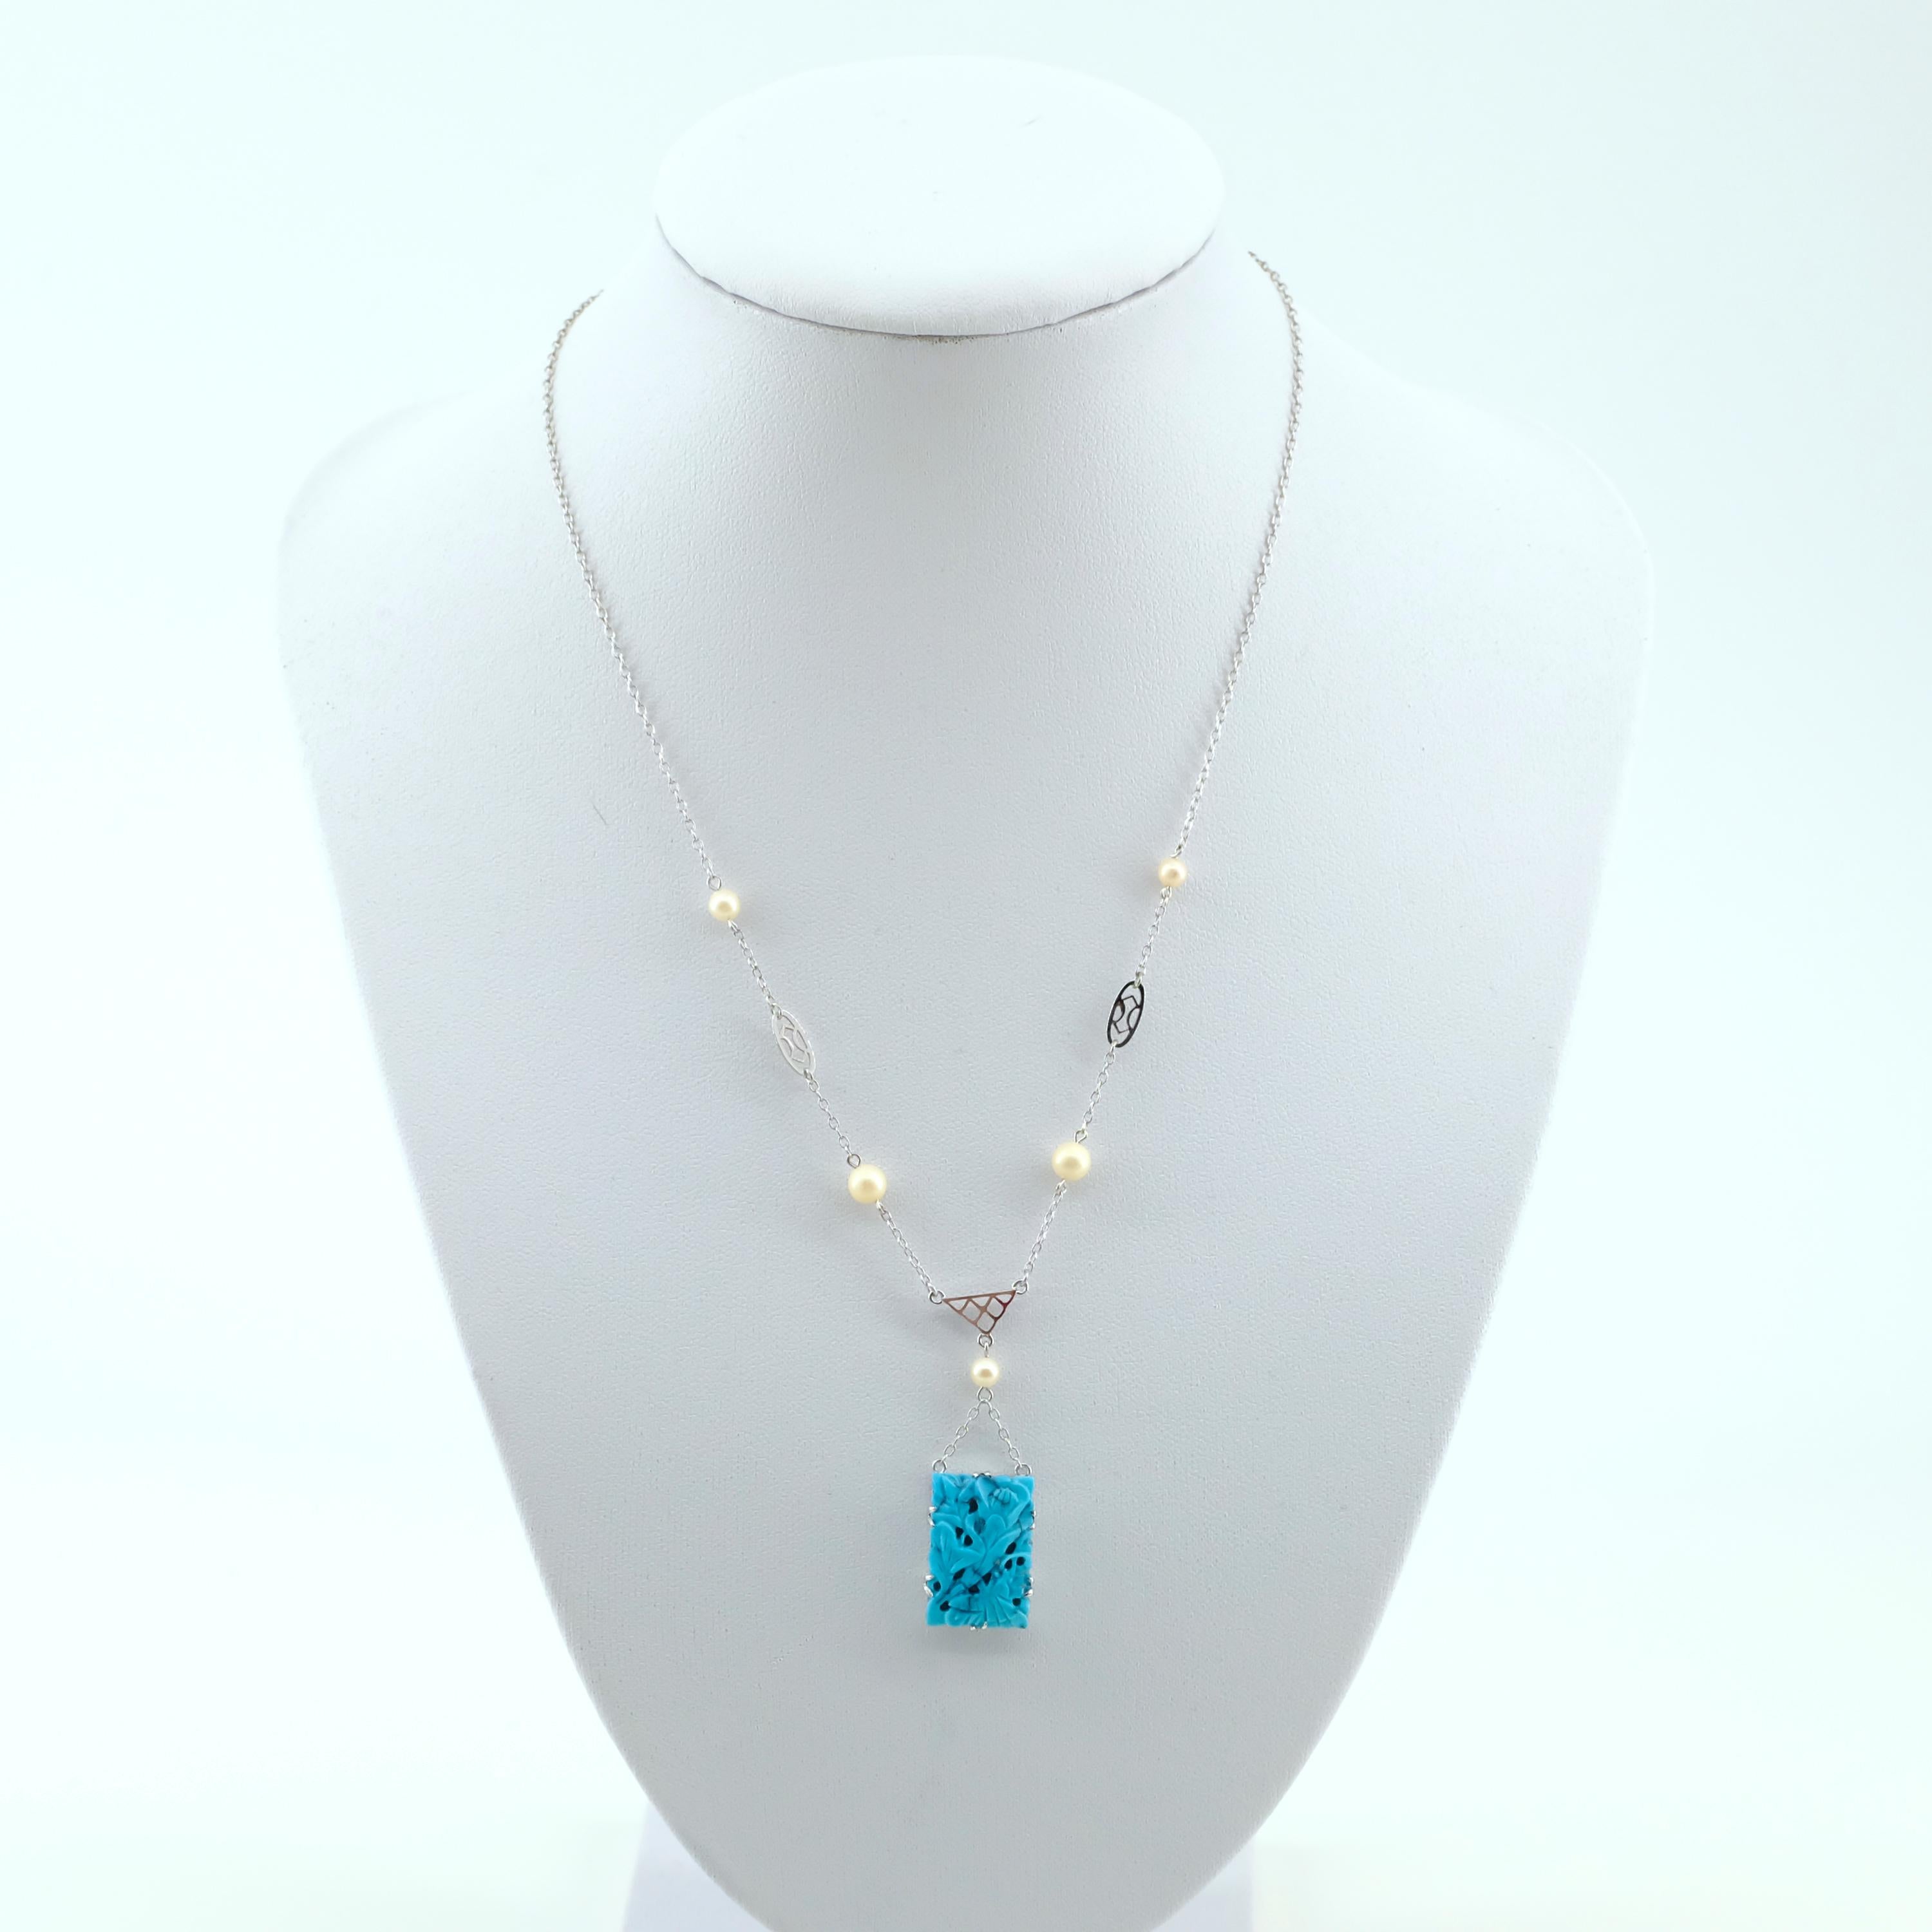 Arts and Crafts Arts & Crafts Necklace of Carved Turquoise and Pearls